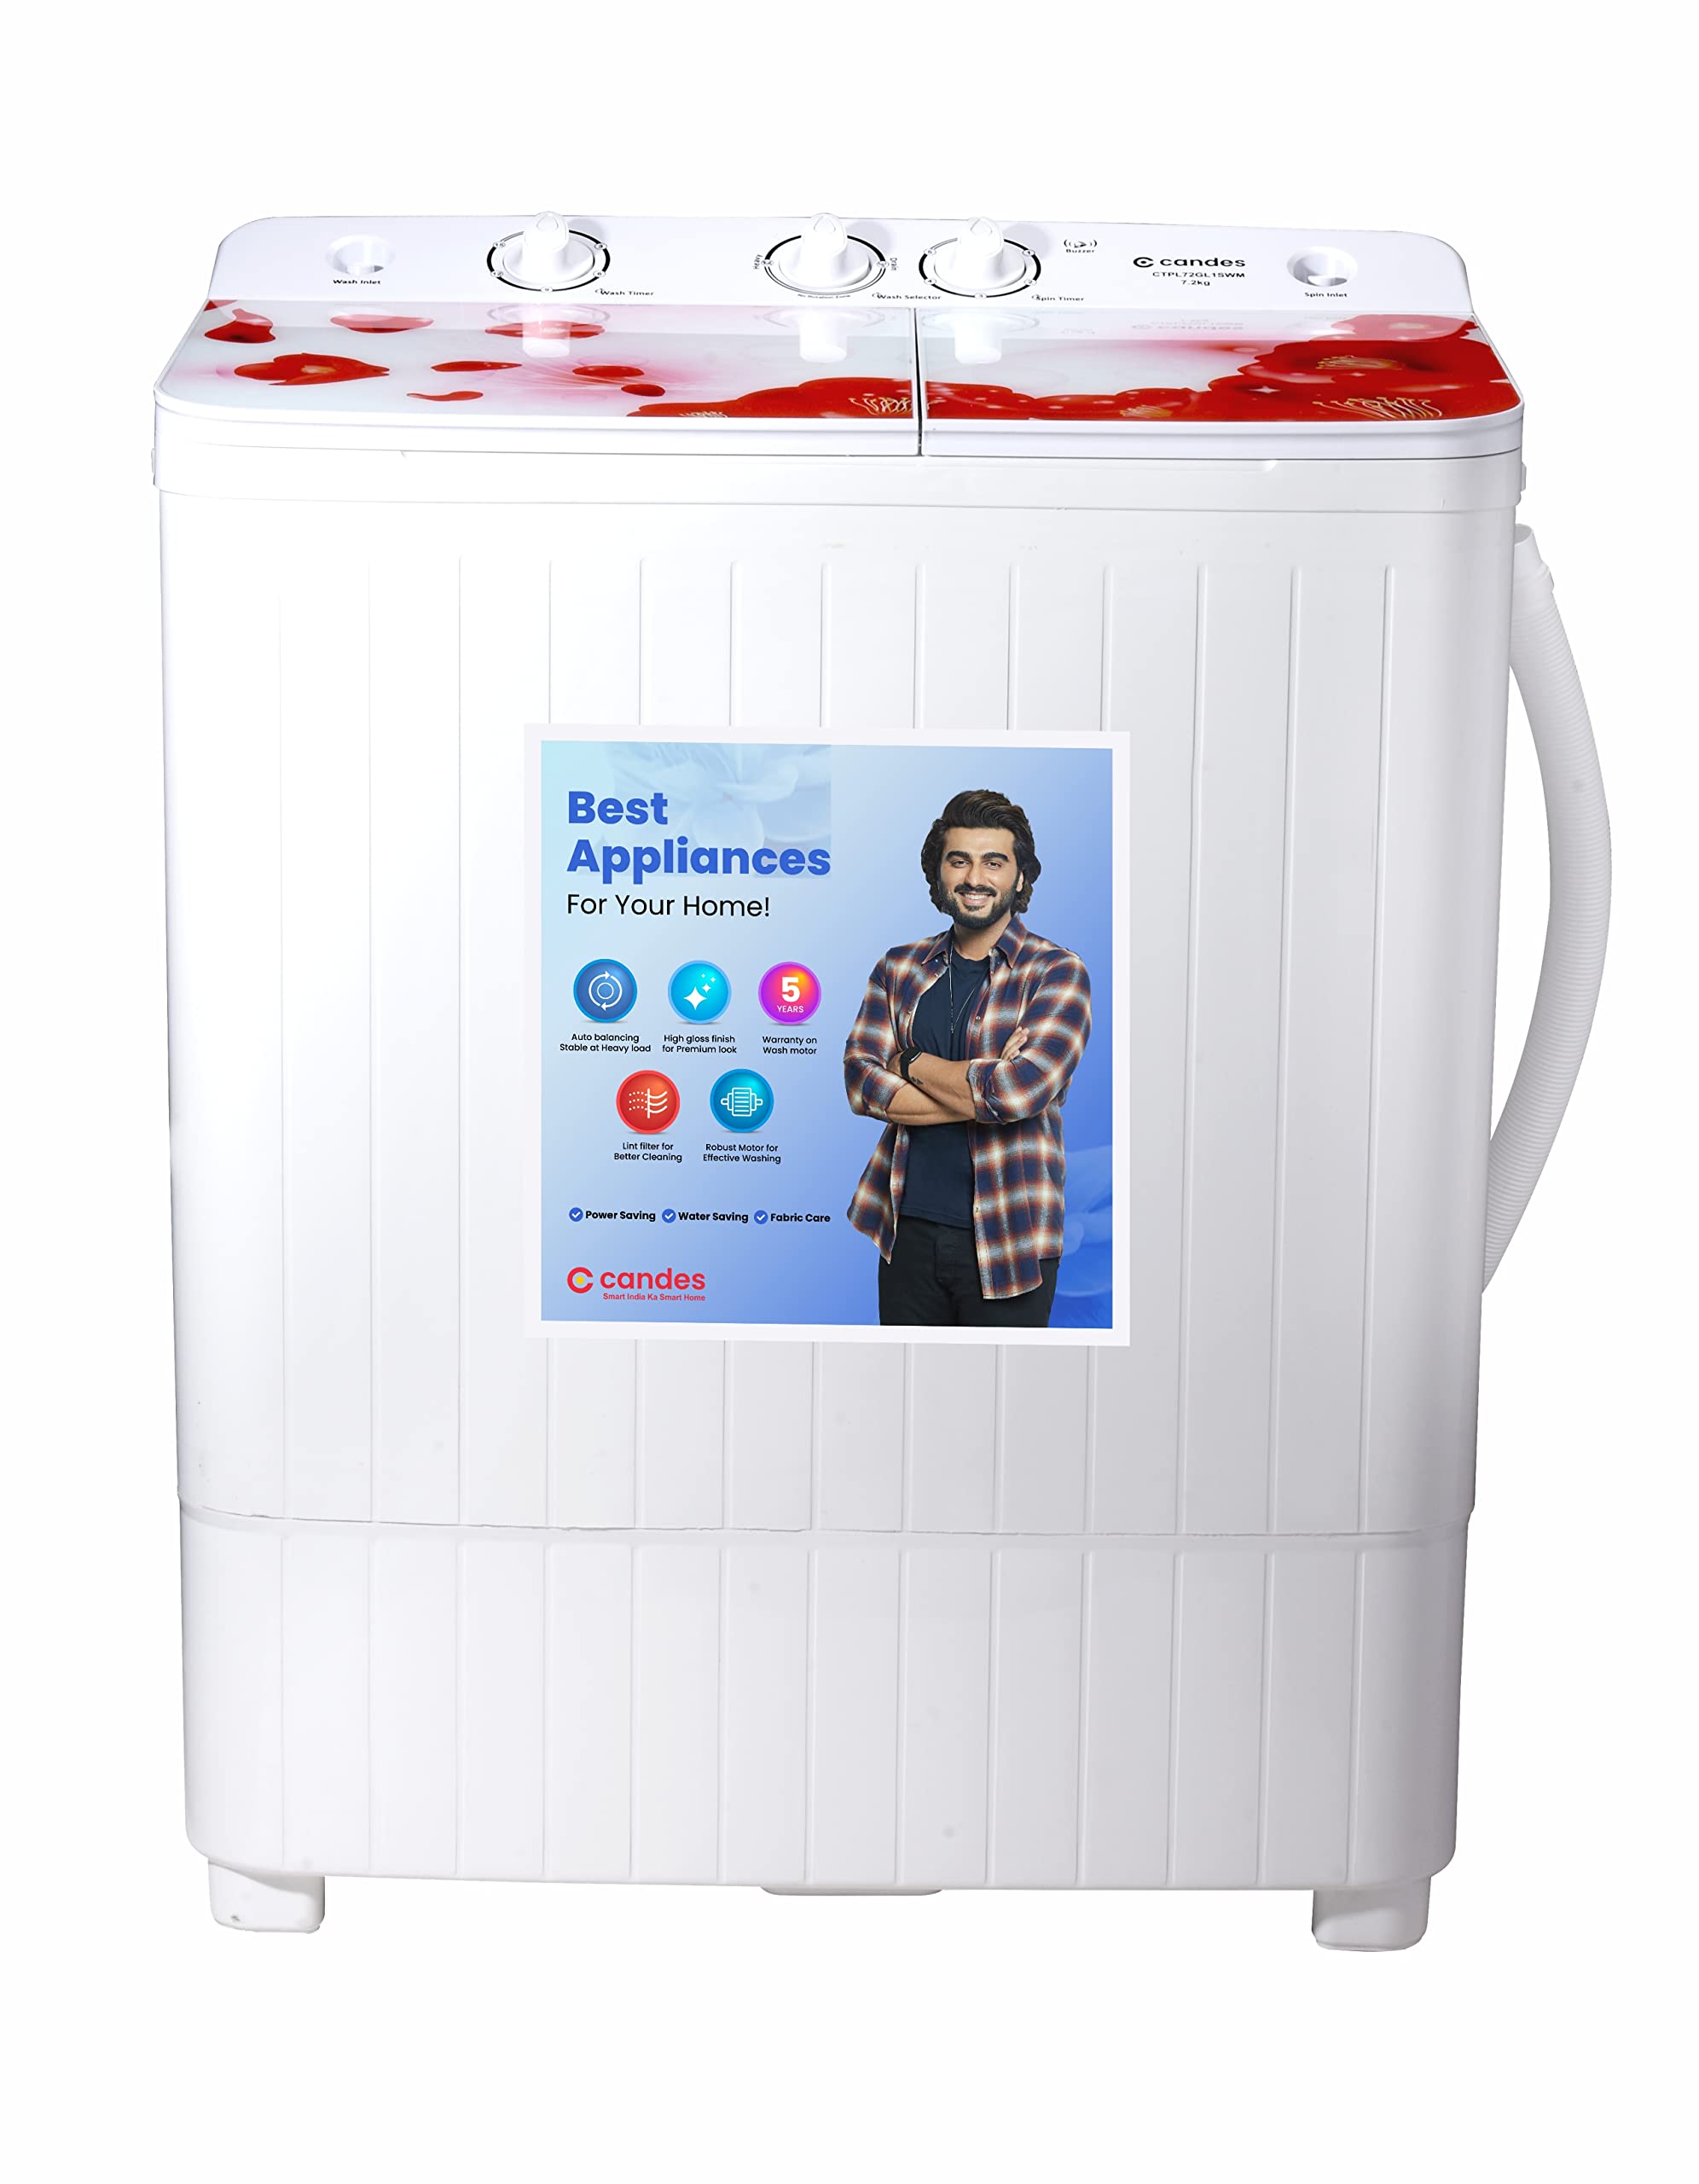 Candes 7.2 kg Semi Automatic Top Load Washing Machine Red & White (CTPL72GL1SWM)